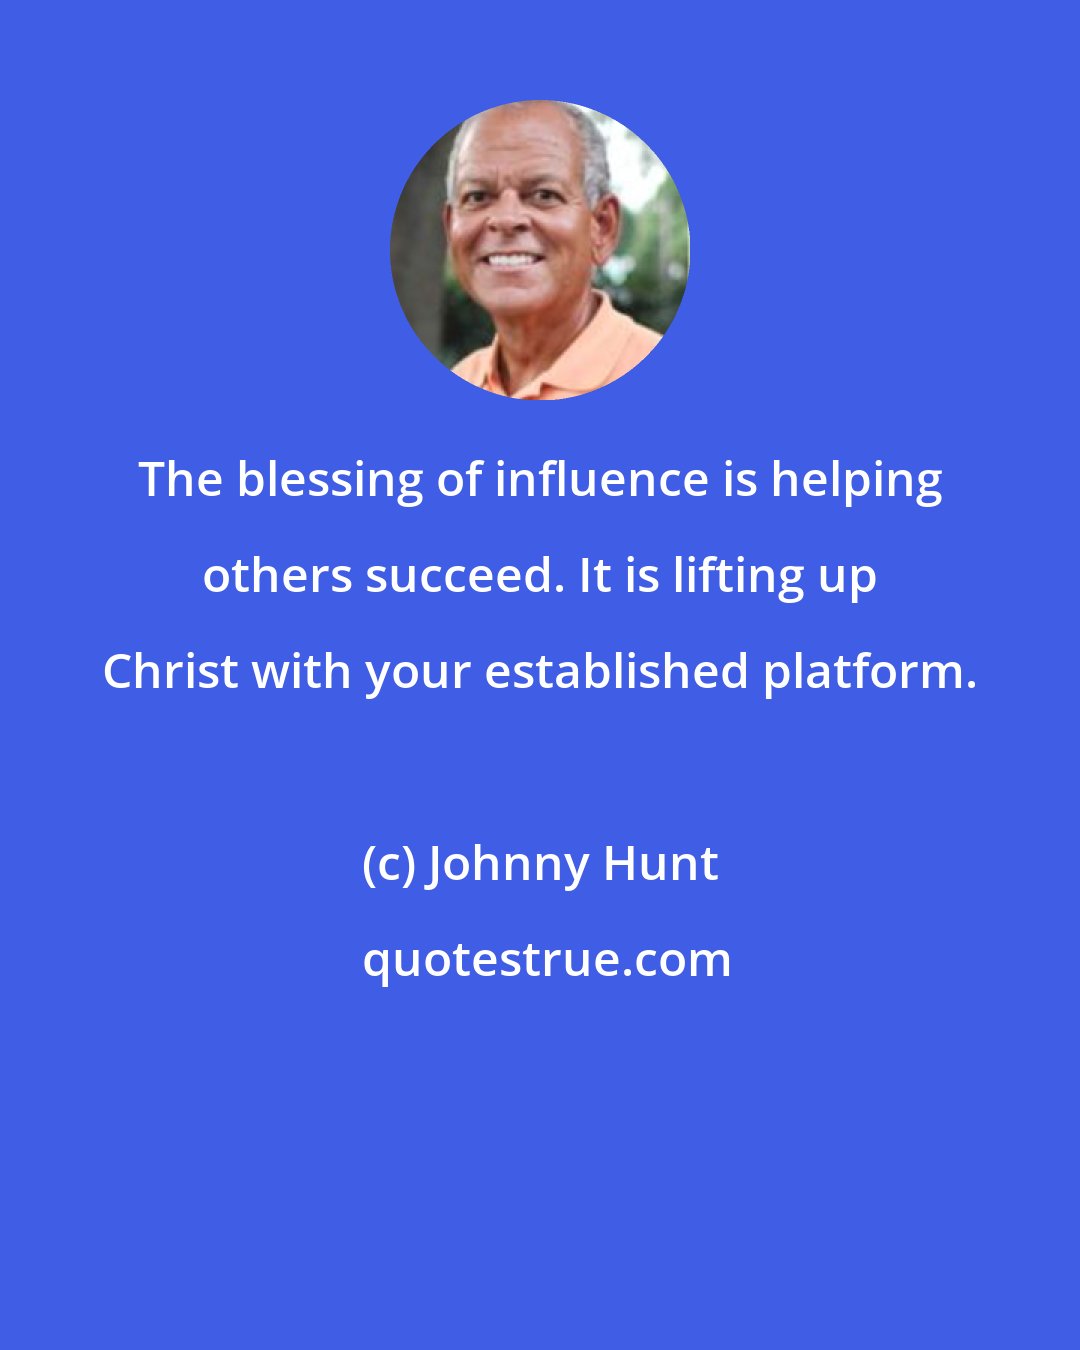 Johnny Hunt: The blessing of influence is helping others succeed. It is lifting up Christ with your established platform.